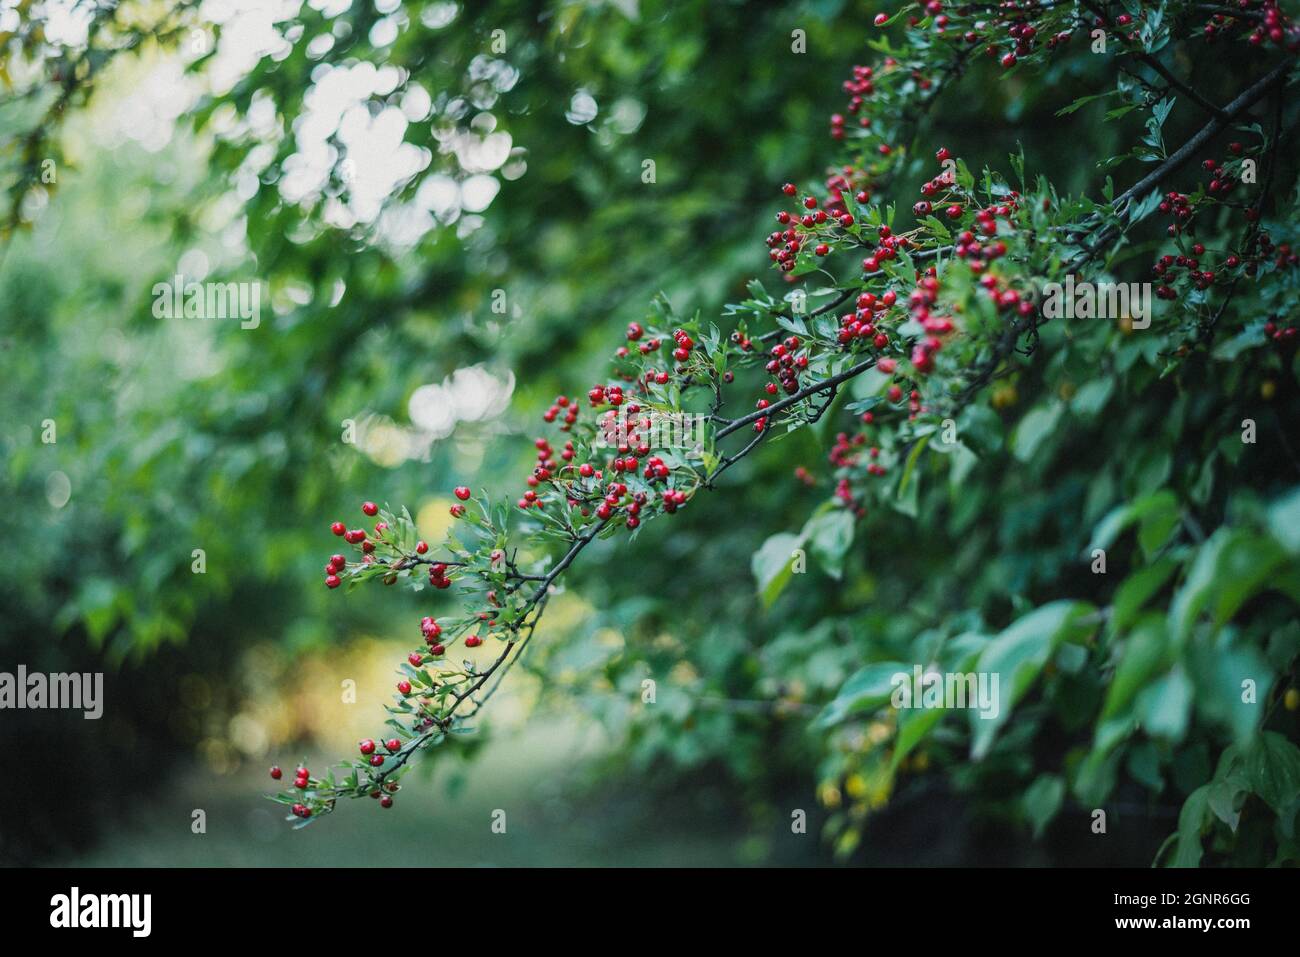 Closeup of the branch with red berries. Aronia arbutifolia. Stock Photo